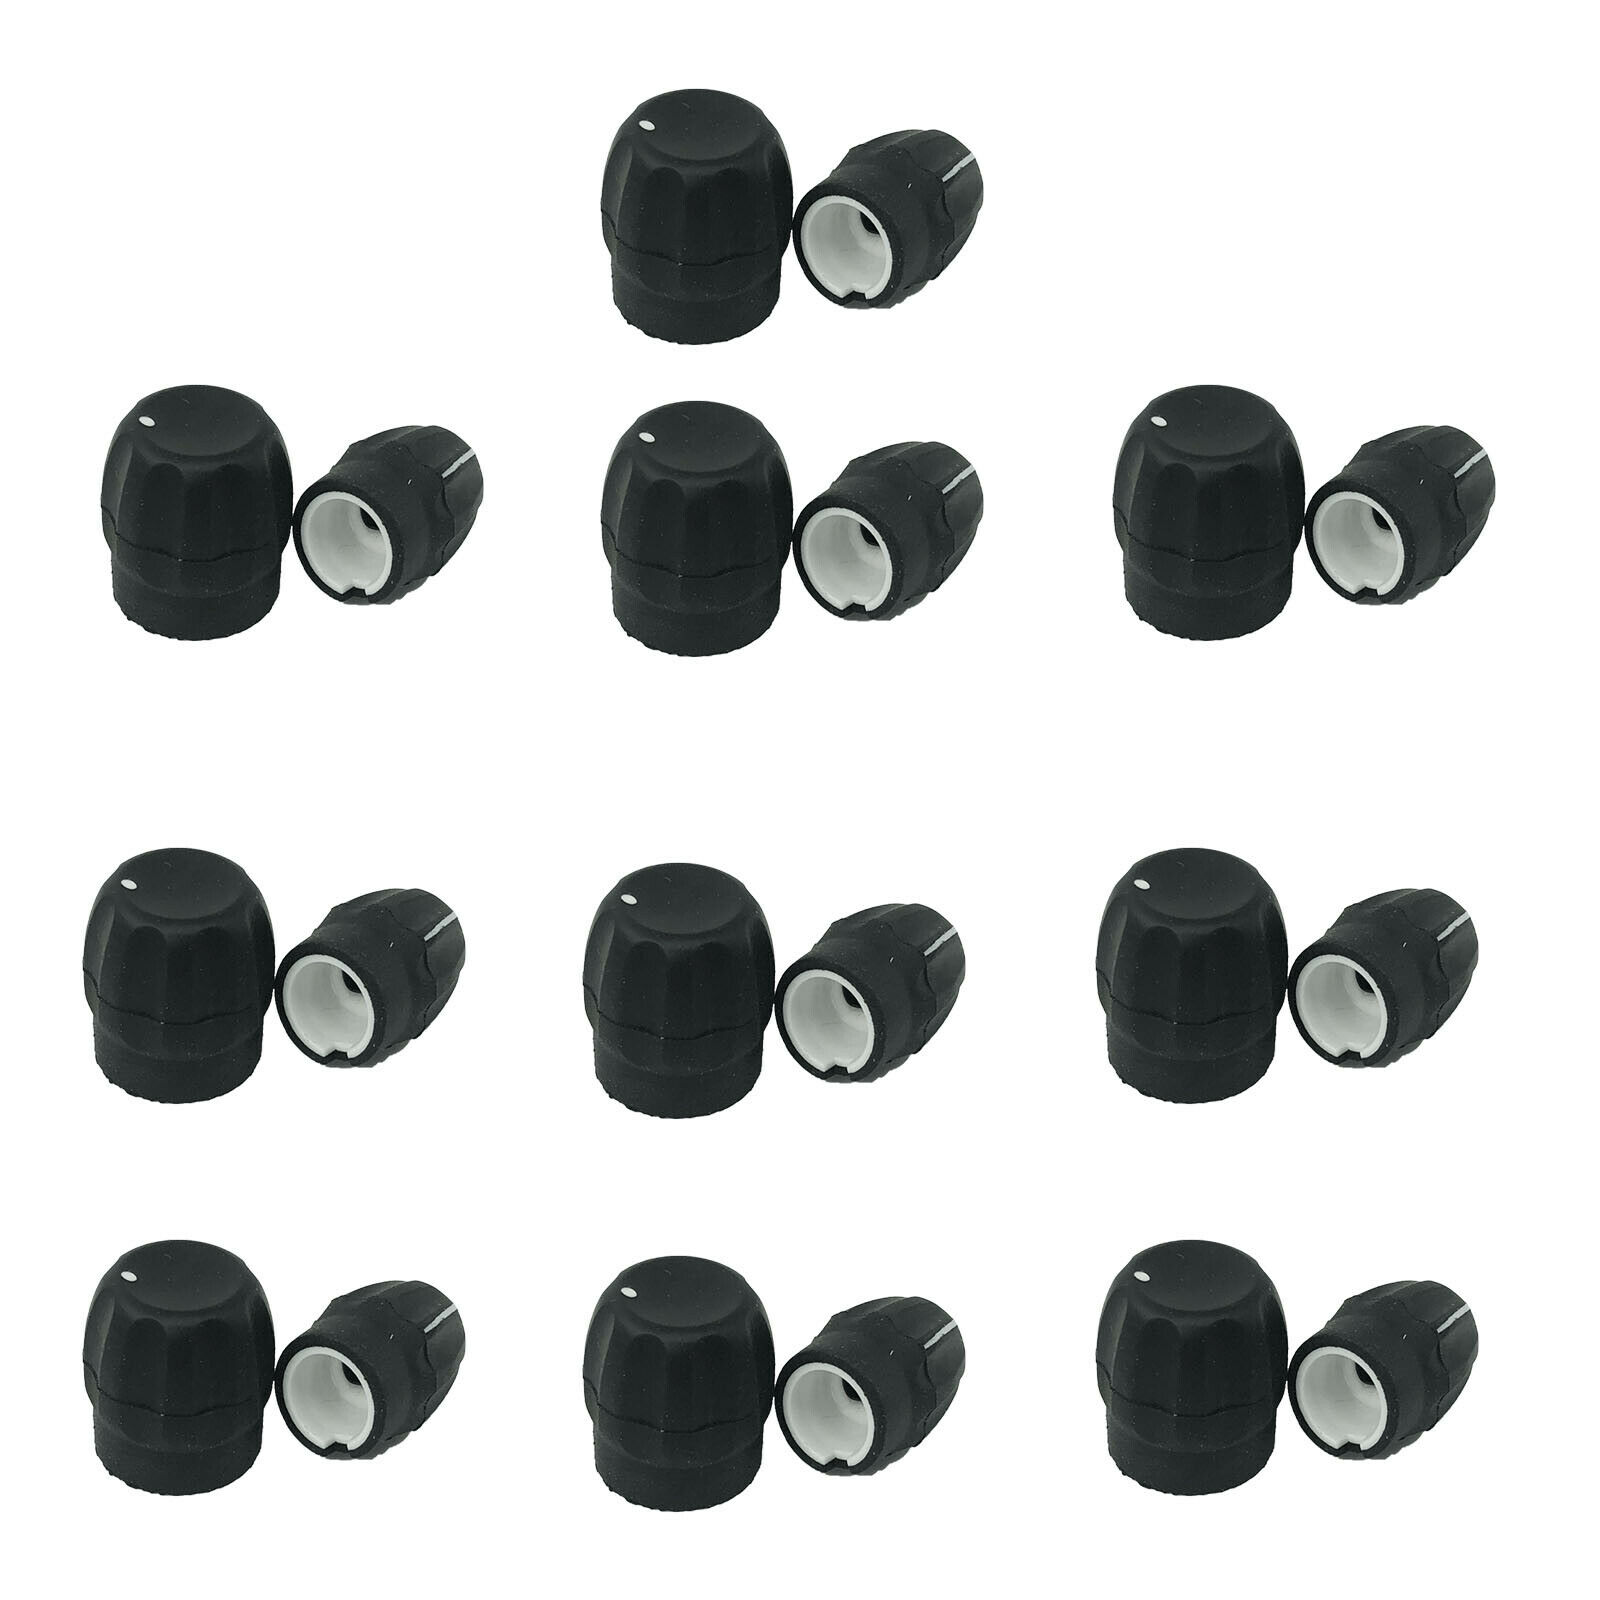 

10pcs Walkie Talkie volume and channel selector knob For Motorola CP200 GP340 EP450 HT1250 radio